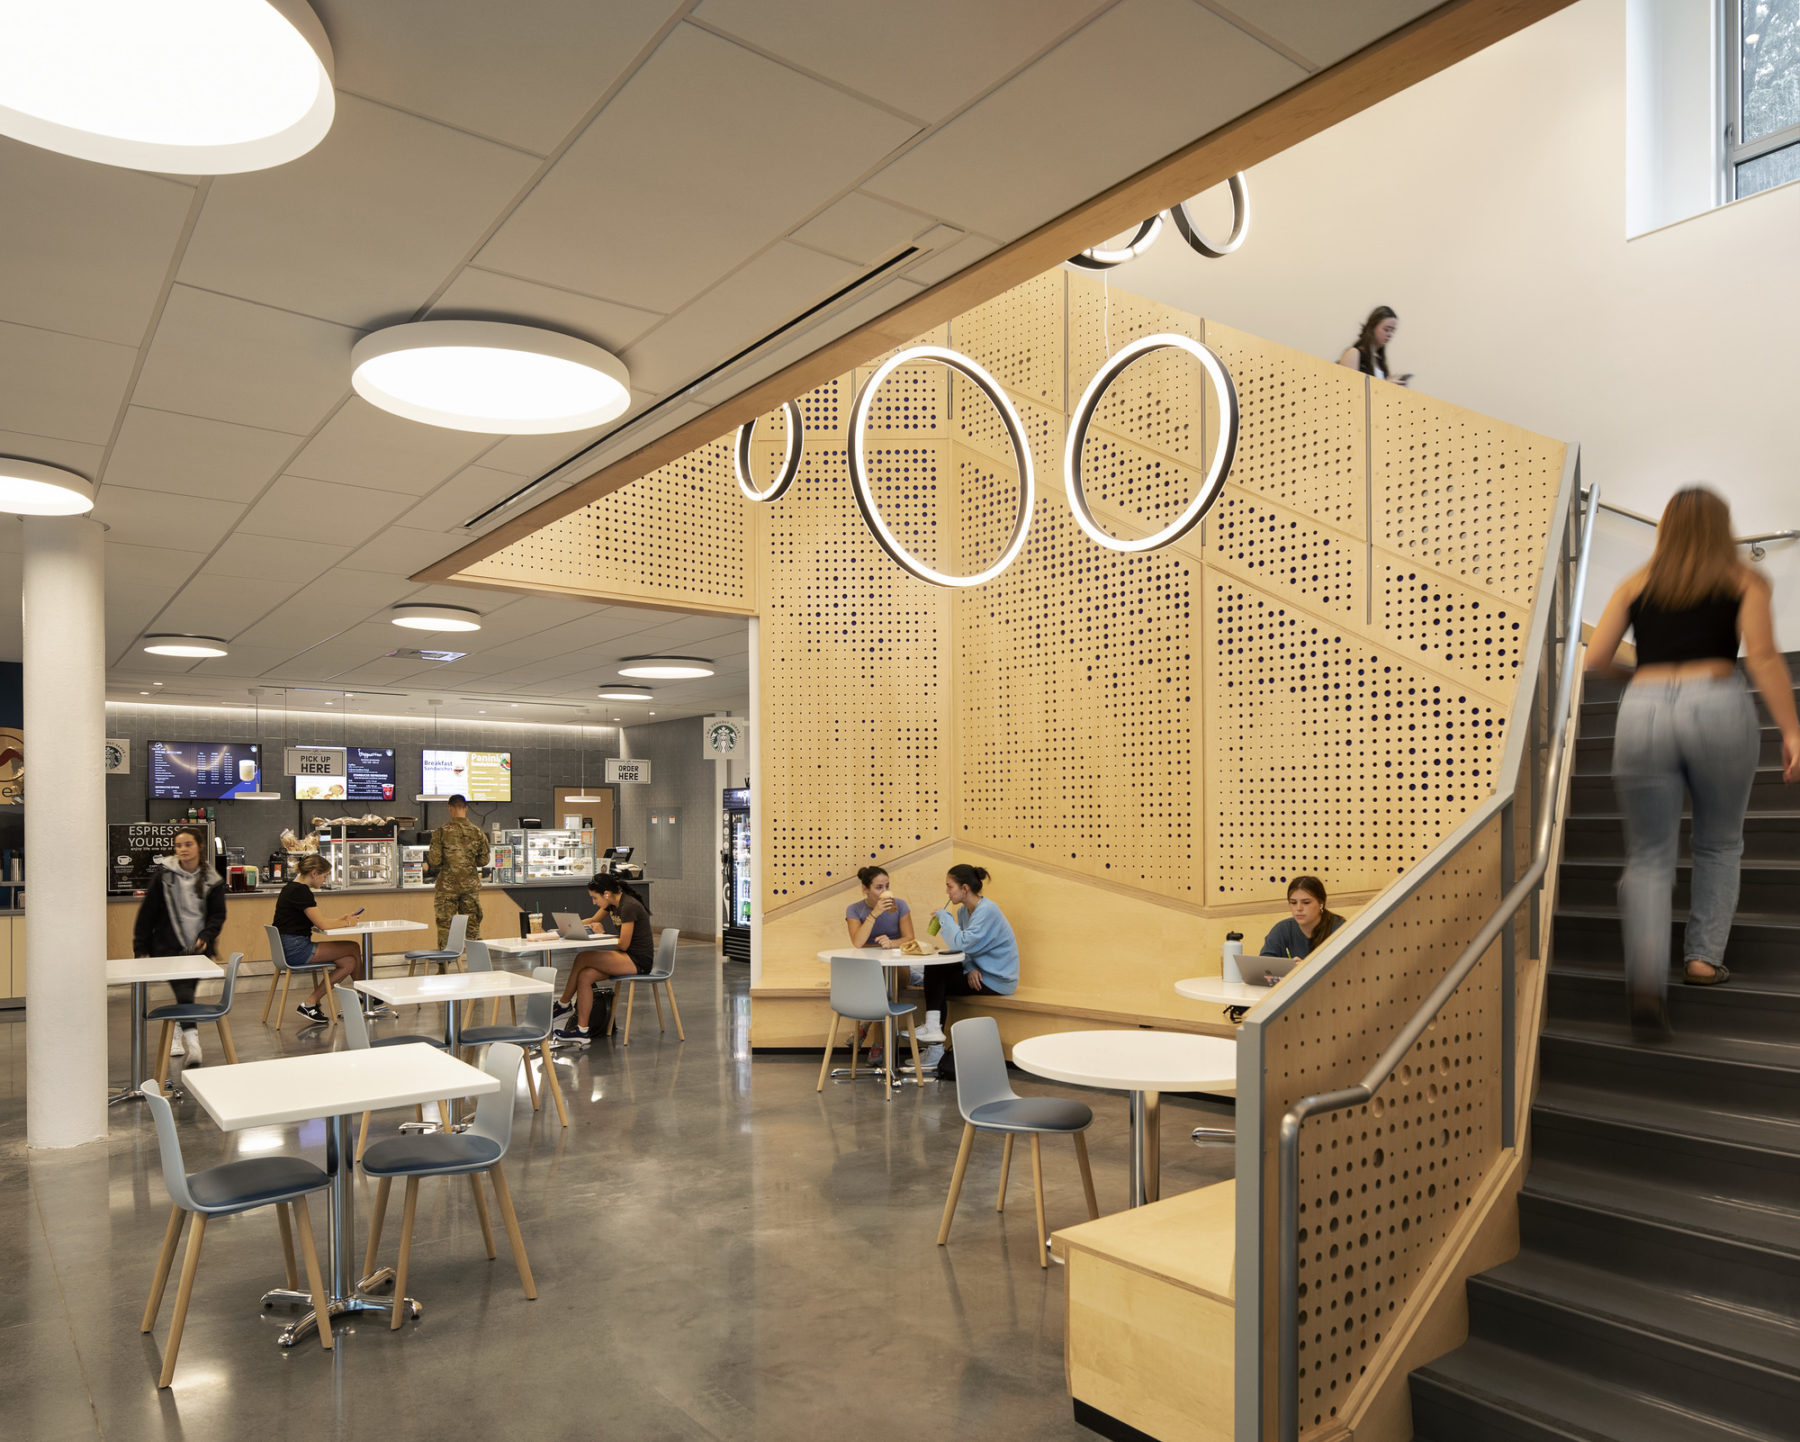 interior photo of building cafe. Students sit underneath a circular light fixture suspended in stairwell